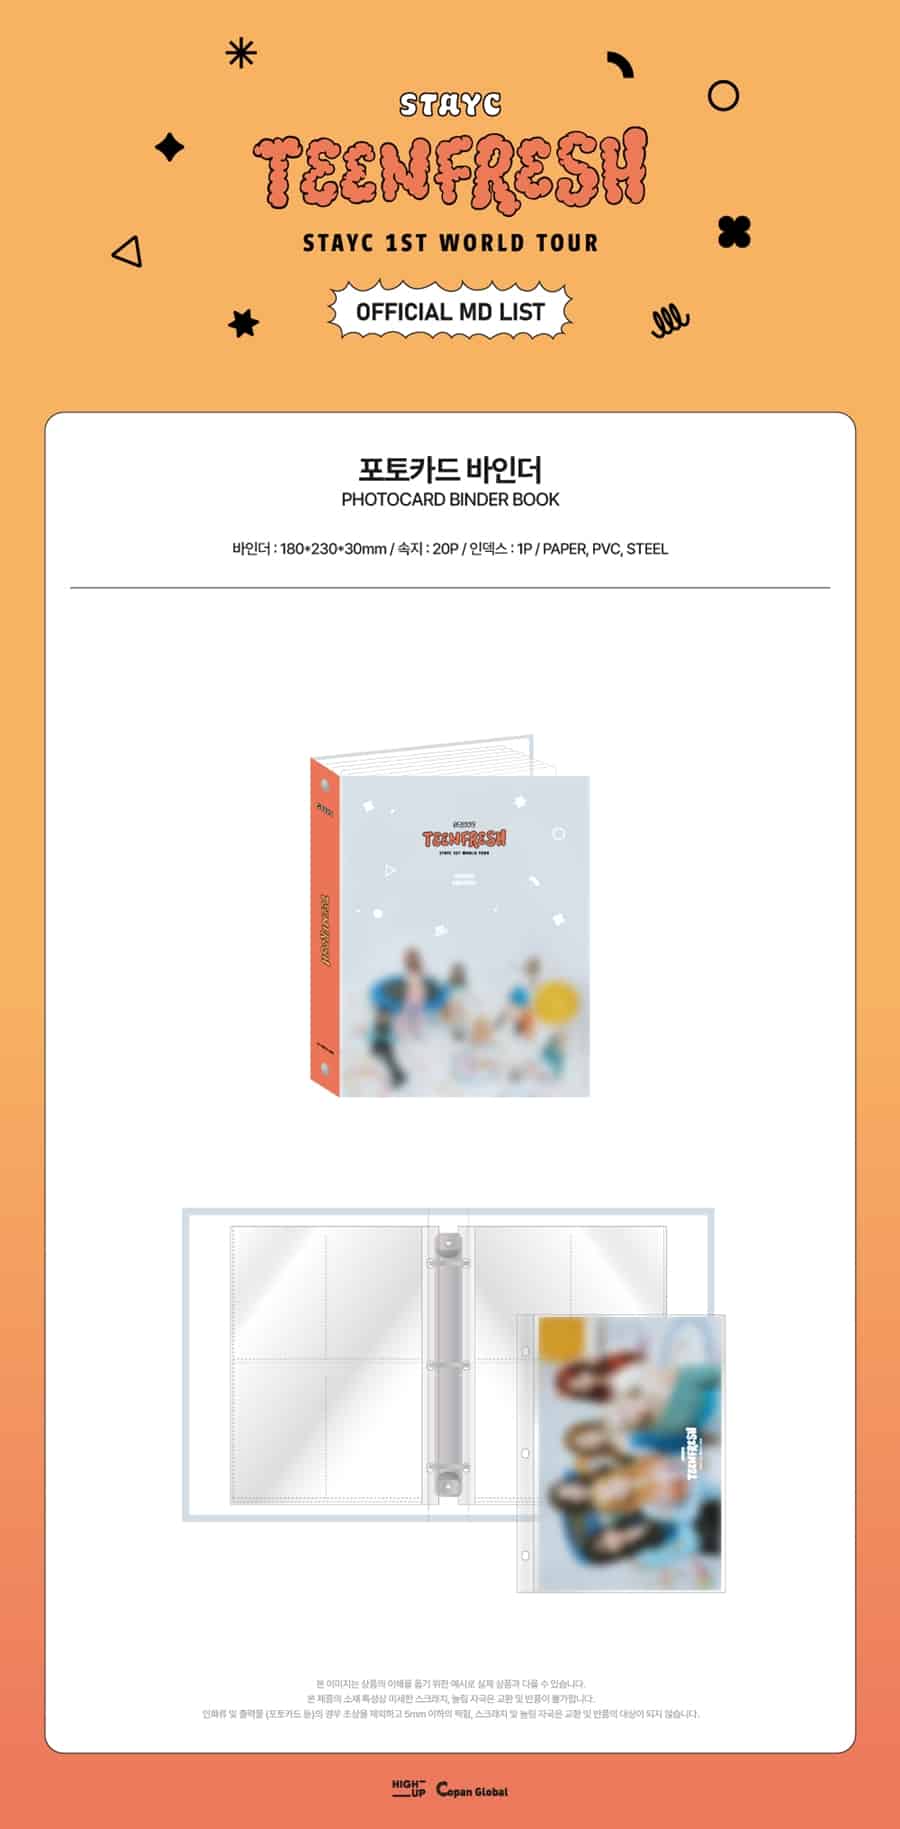 stayc-06-id-photocard-binder-book-stayc-1st-world-tour-teenfresh-official-md-wholesales